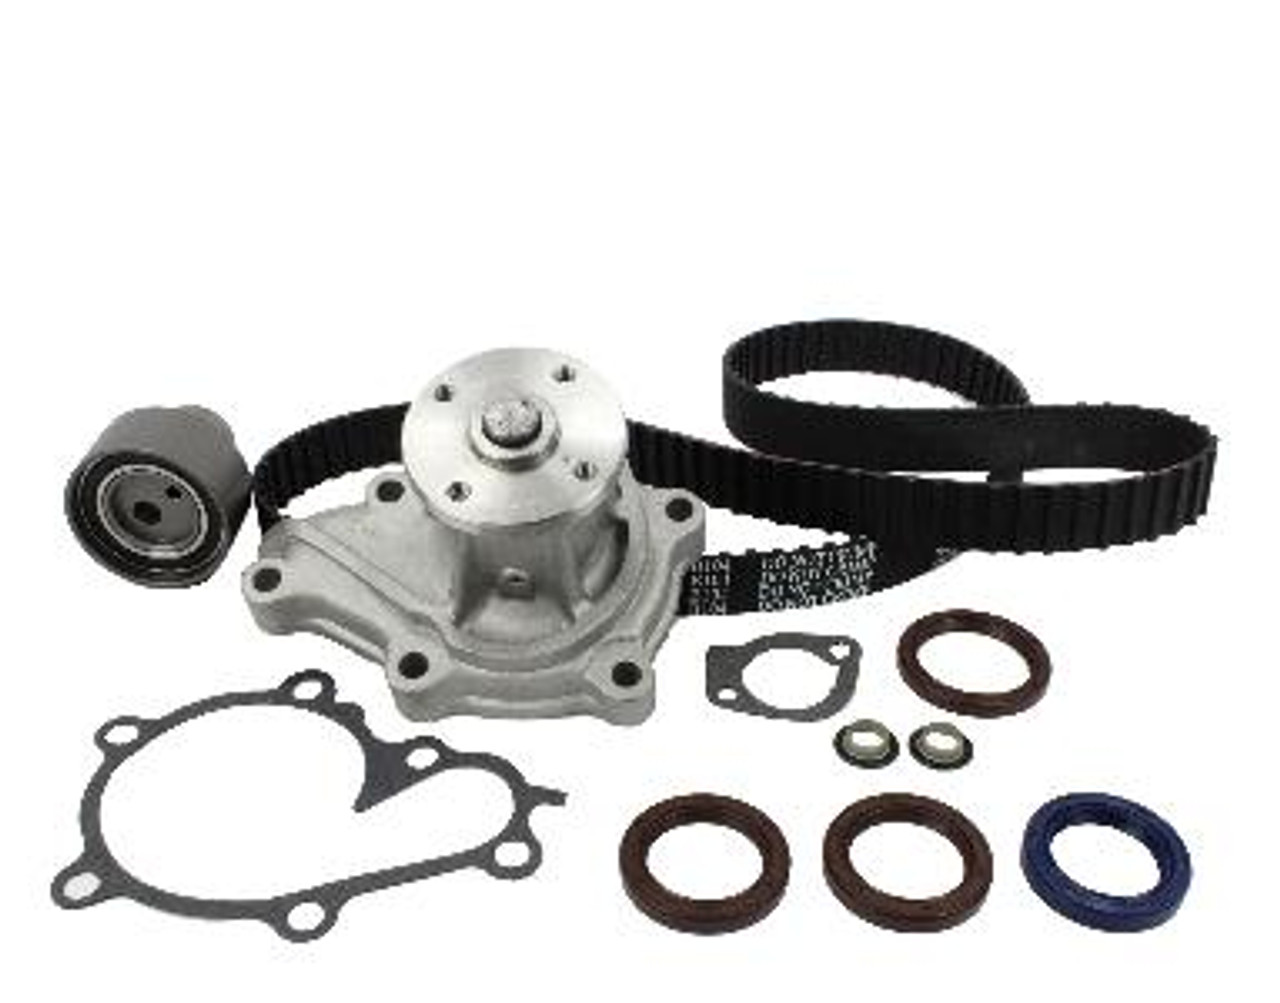 1985 Nissan Maxima 3.0L Engine Timing Belt Kit with Water Pump TBK616AWP -3